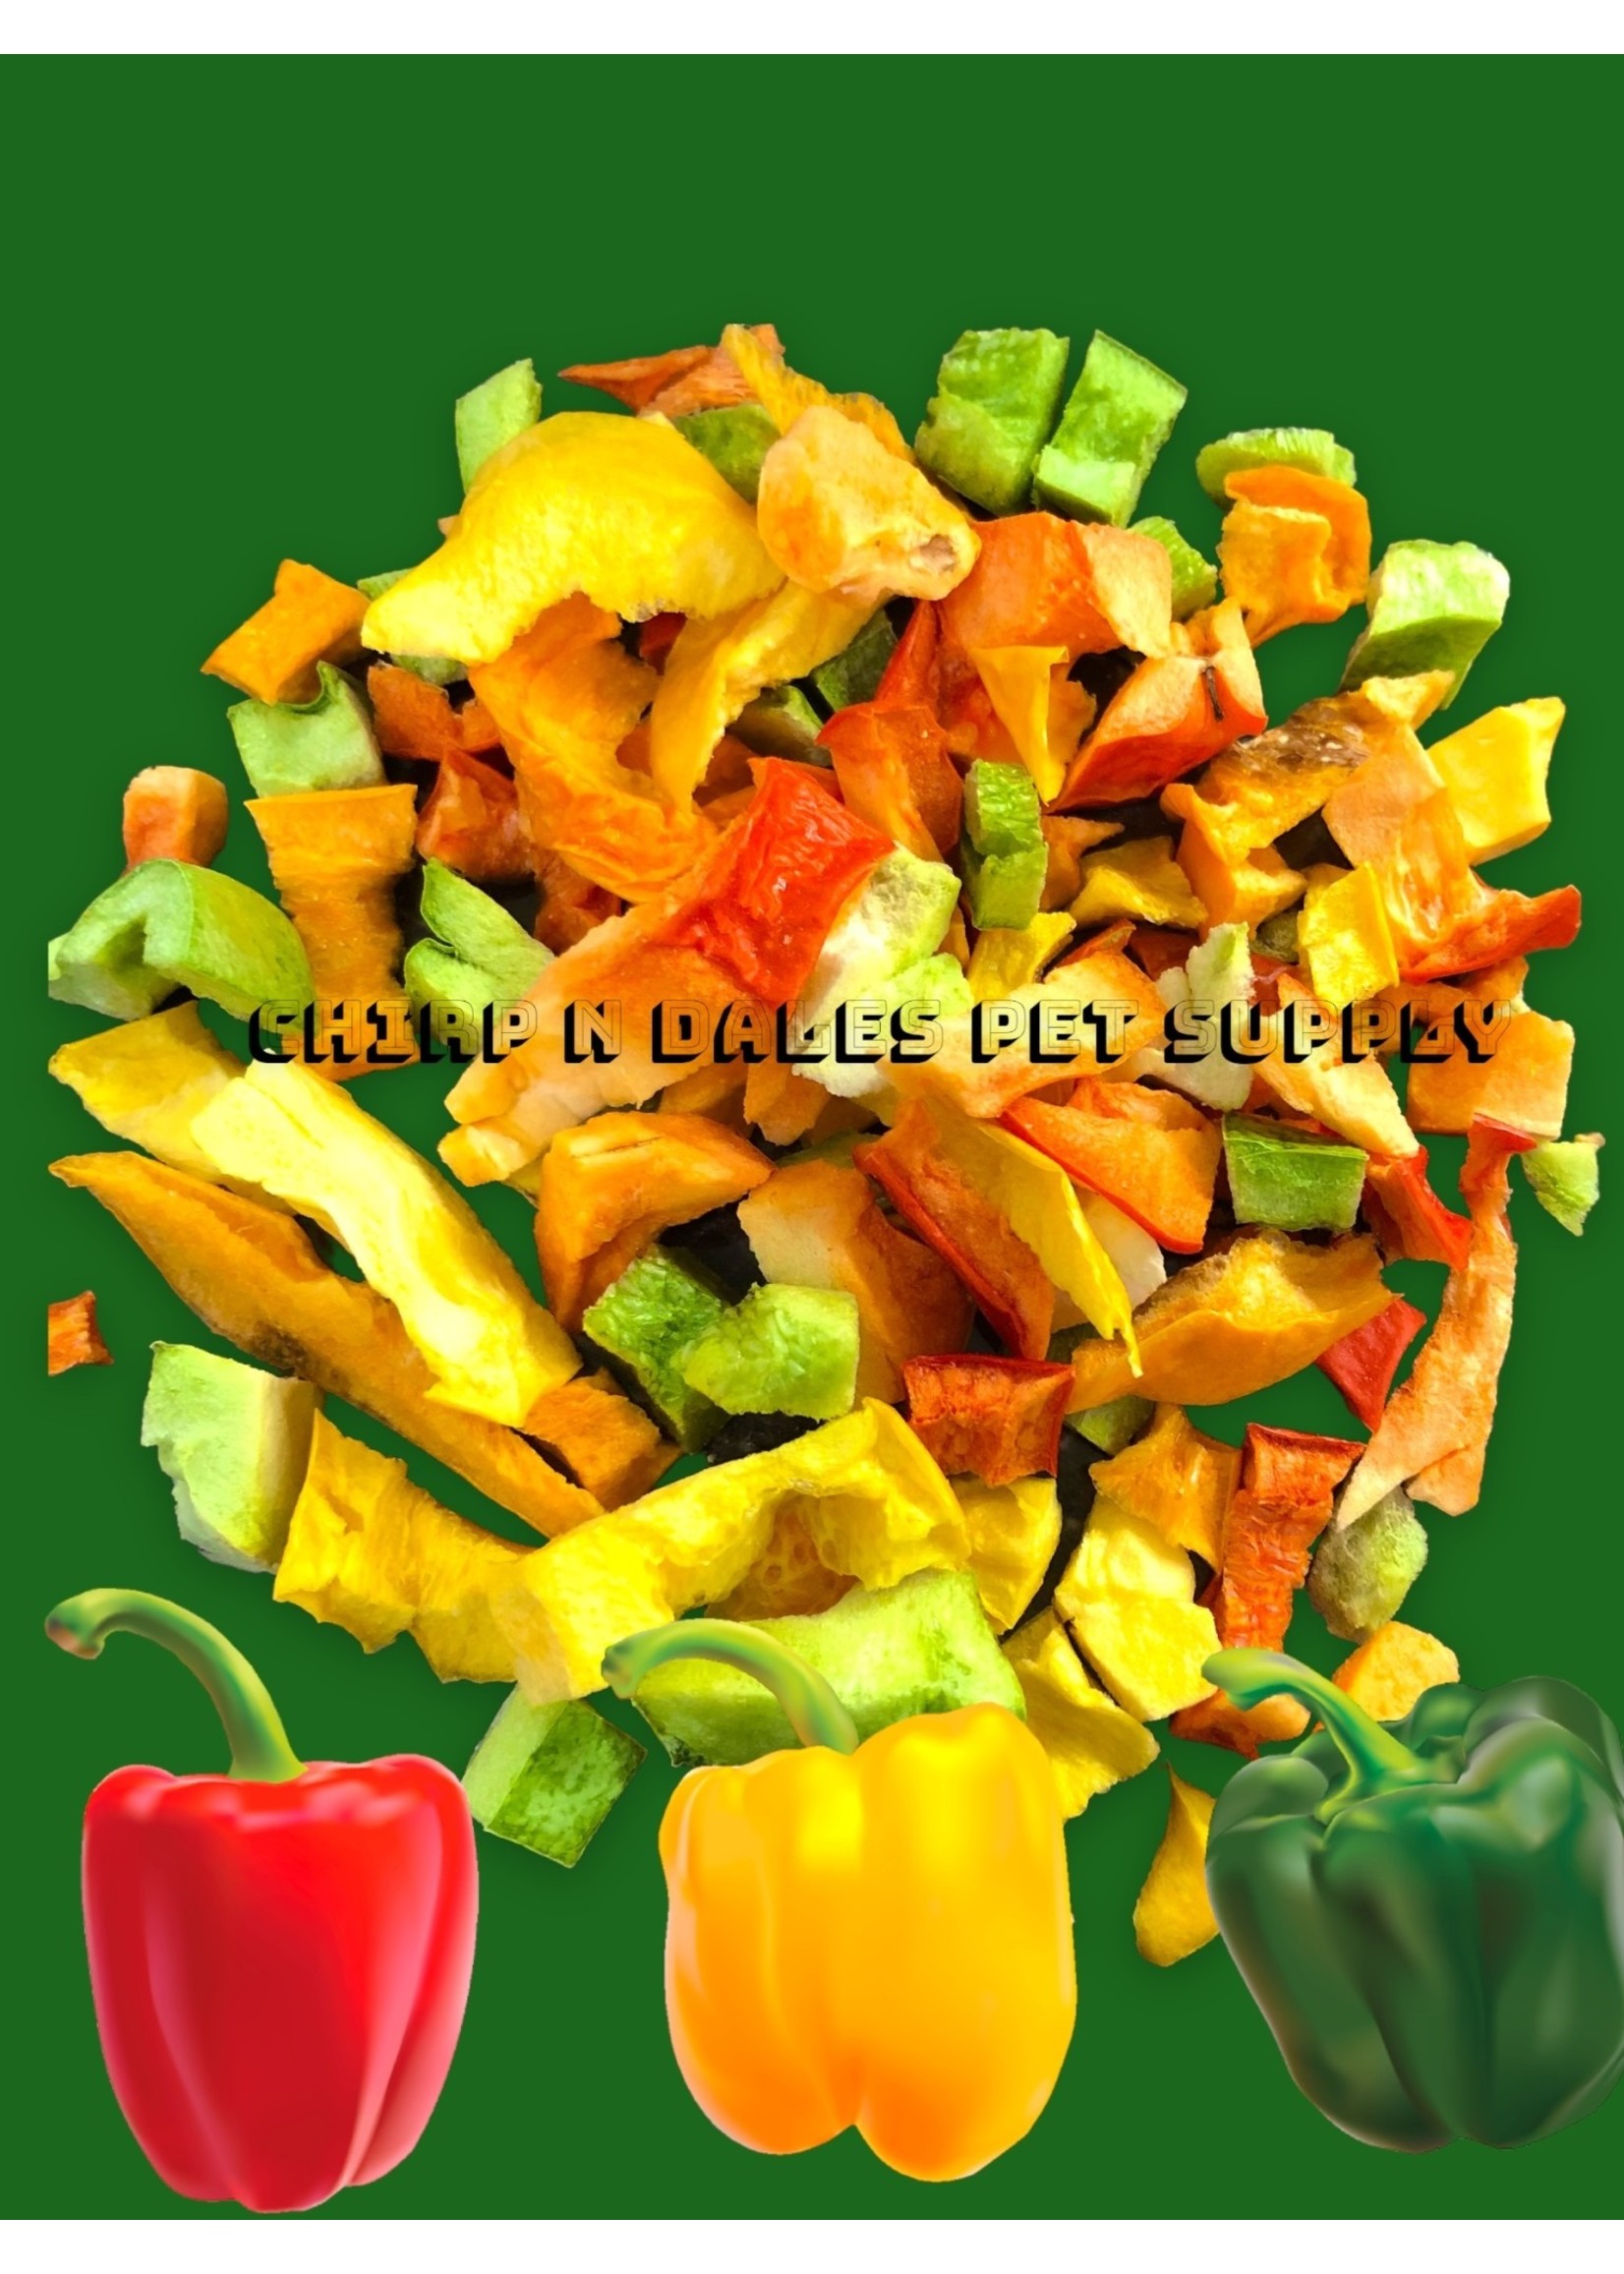 CND Freeze Dried Products Simply Sweet Peppers Mixed  Freeze Dried 15g